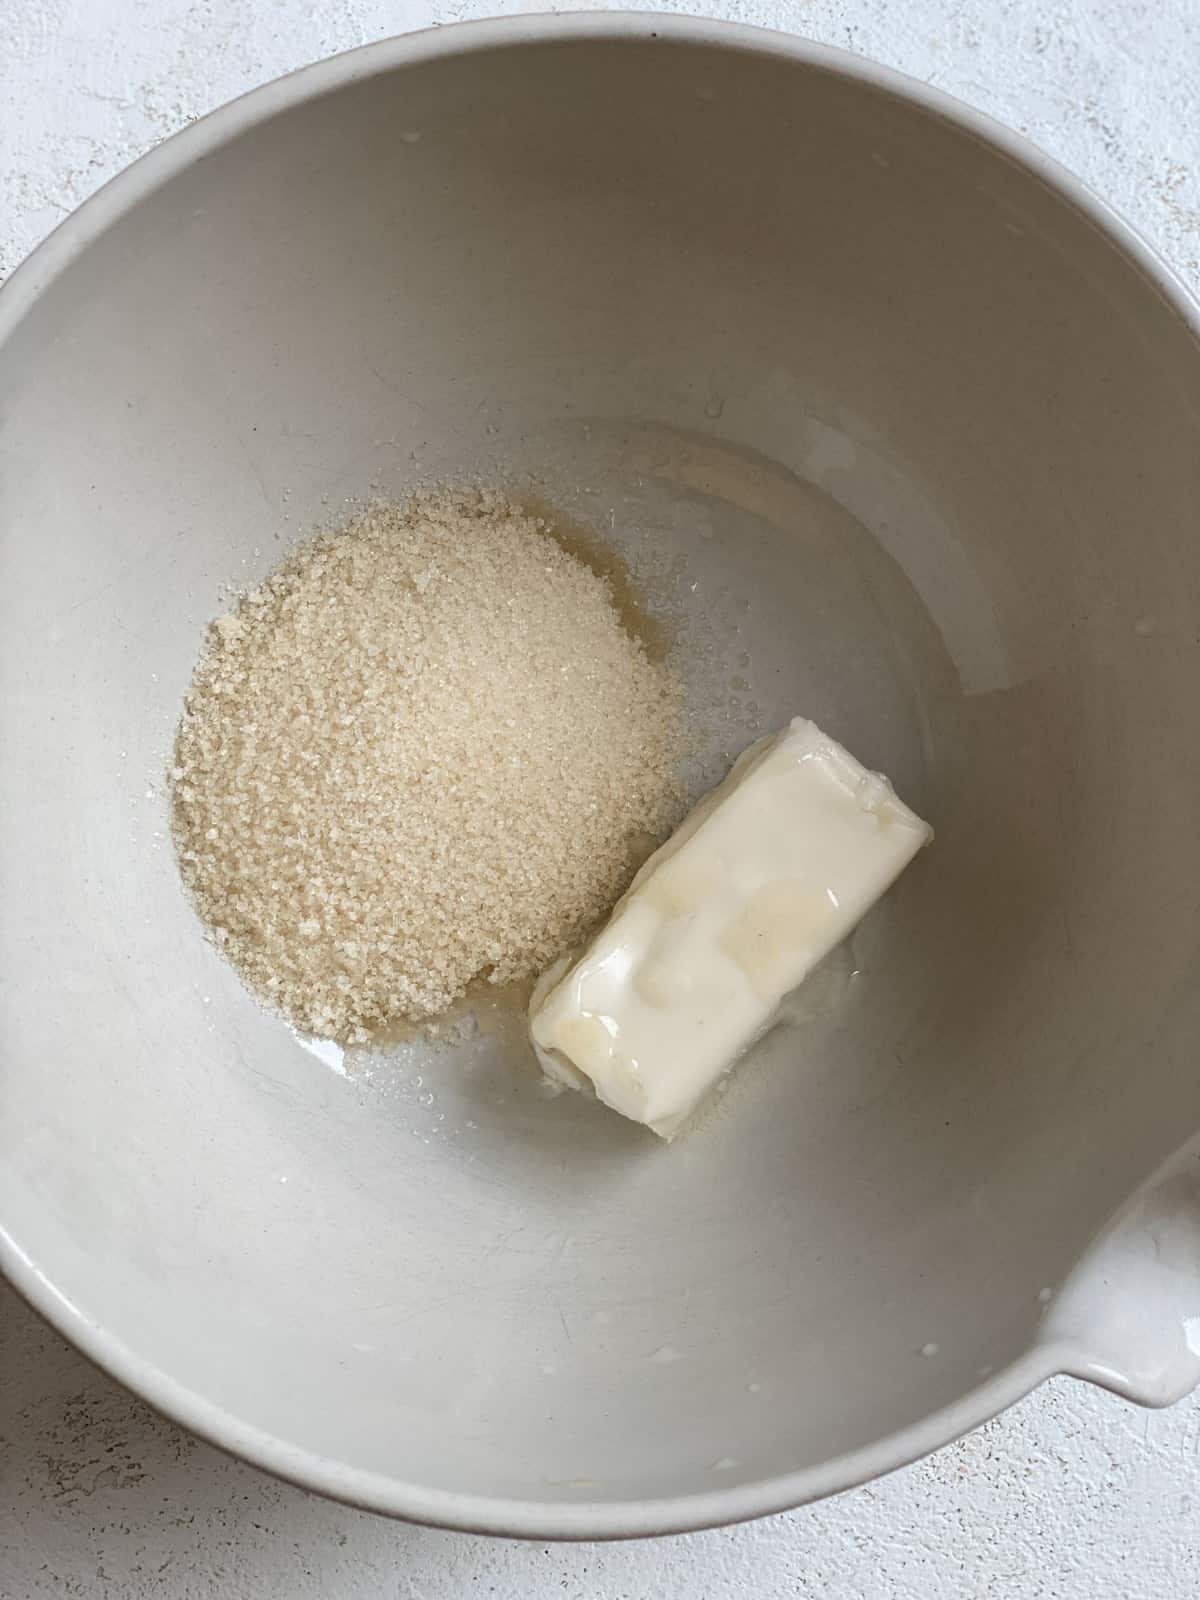 process of mixing sugar and butter in a white bowl